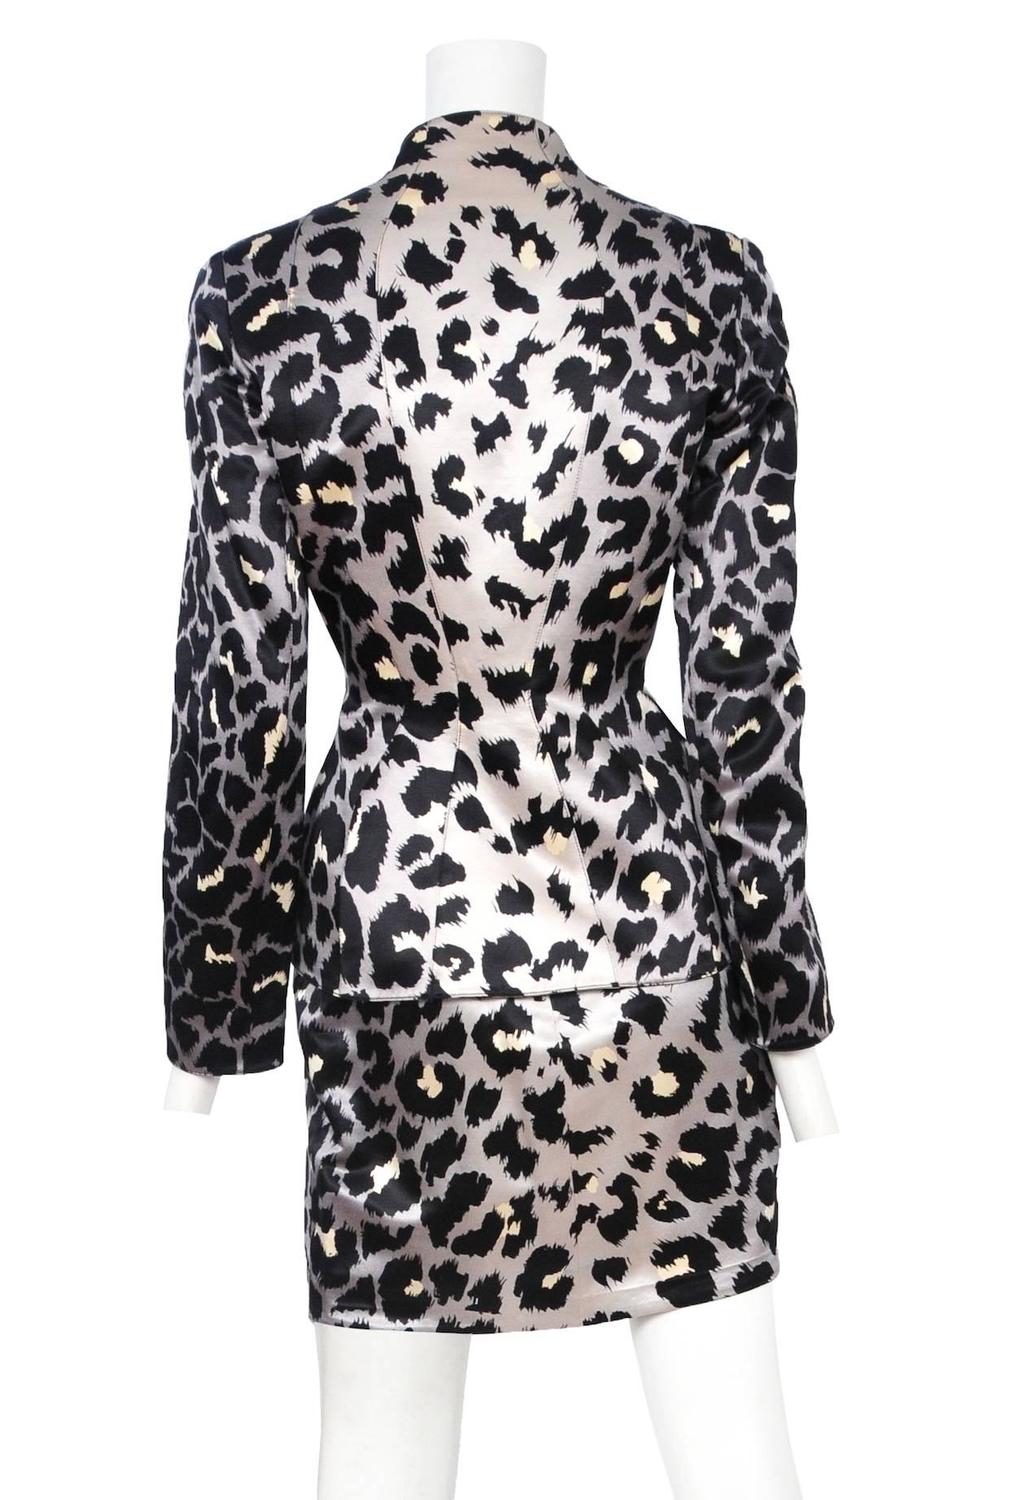 Thierry Mugler Grey Leopard Suit For Sale at 1stdibs